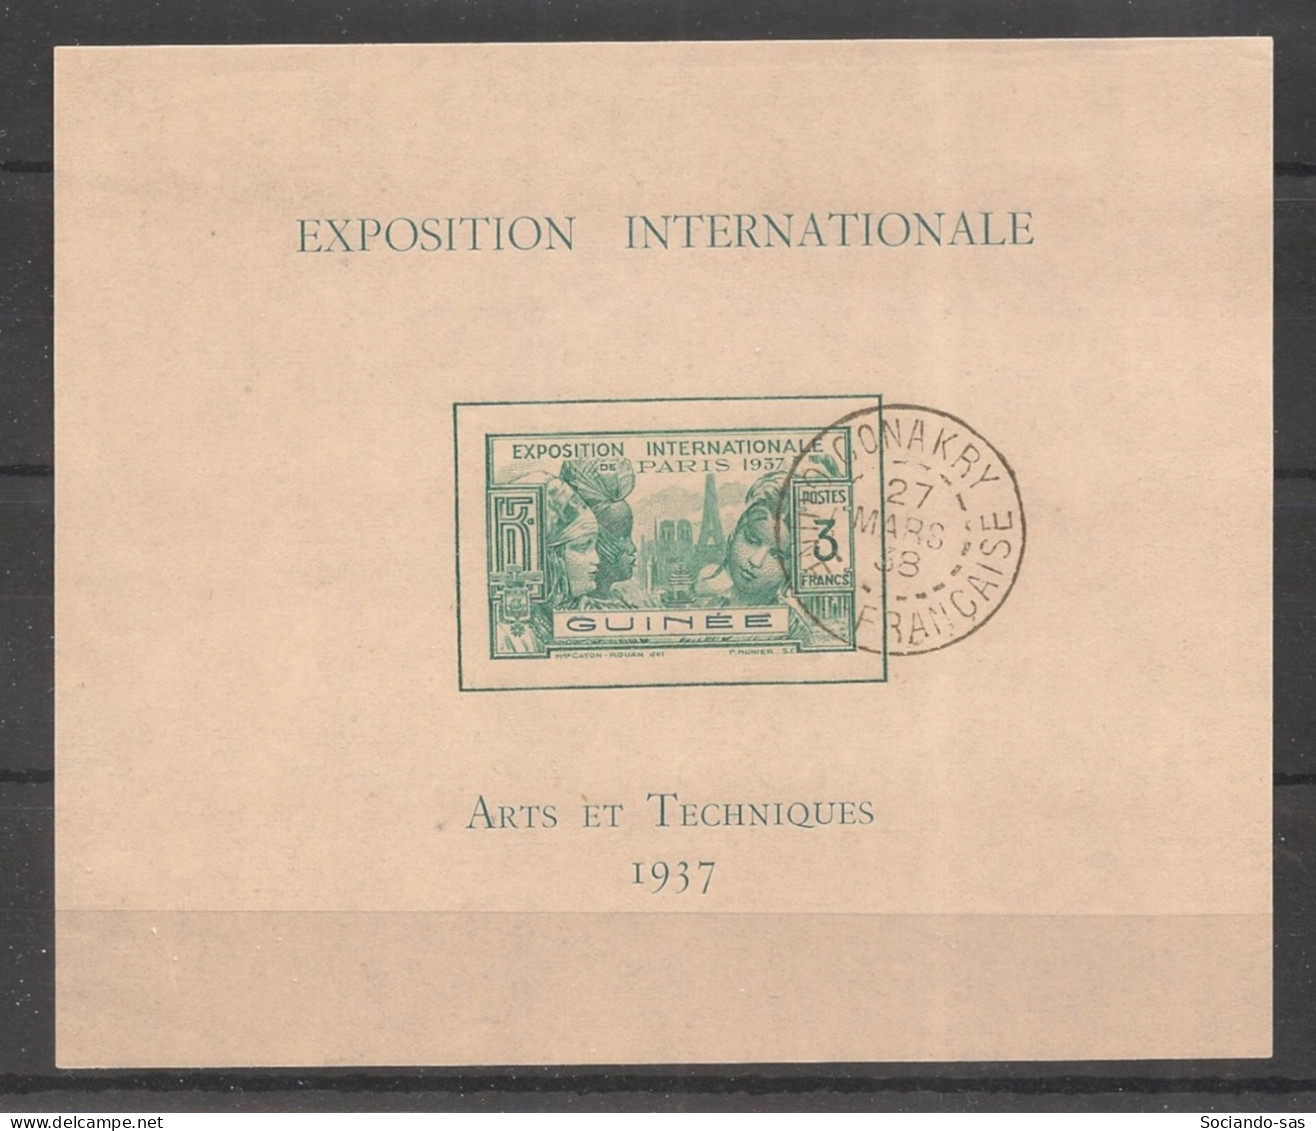 GUINEE - 1937 - Bloc Feuillet BF N°YT. 1 - Exposition Internationale - Oblitéré / Used - Used Stamps